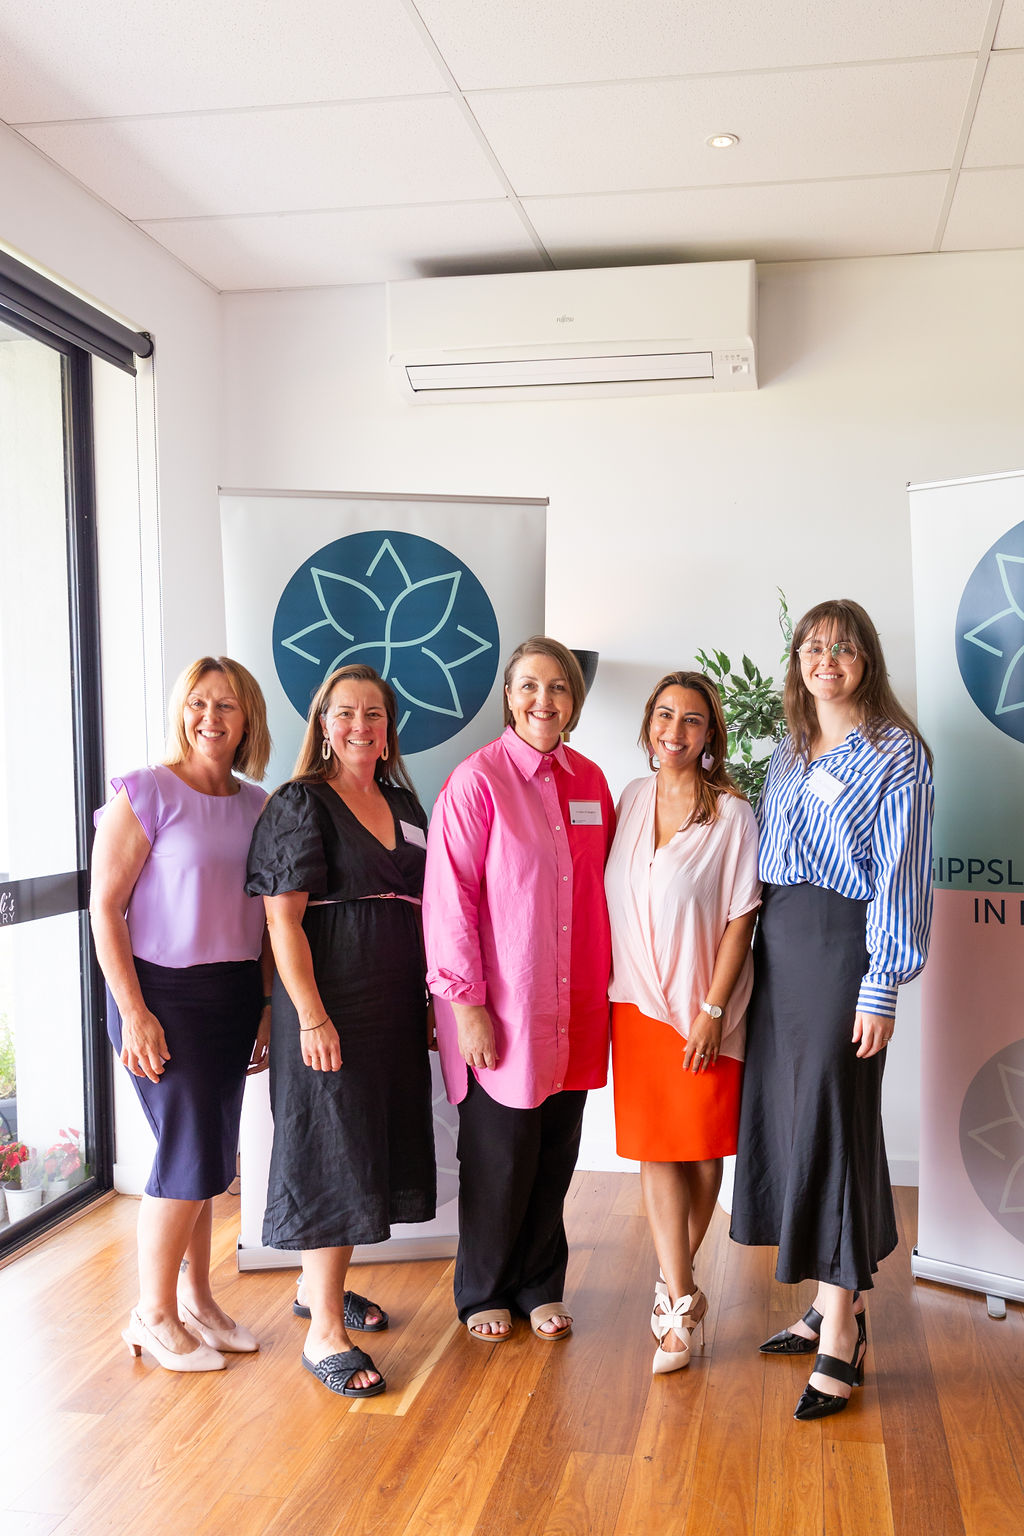 Cr Tracie Lund (Latrobe City Mayor), Cr Kellie O'Callaghan and Latrobe City Staff with Dr Emma Fulu at Gippsland Women in Business event